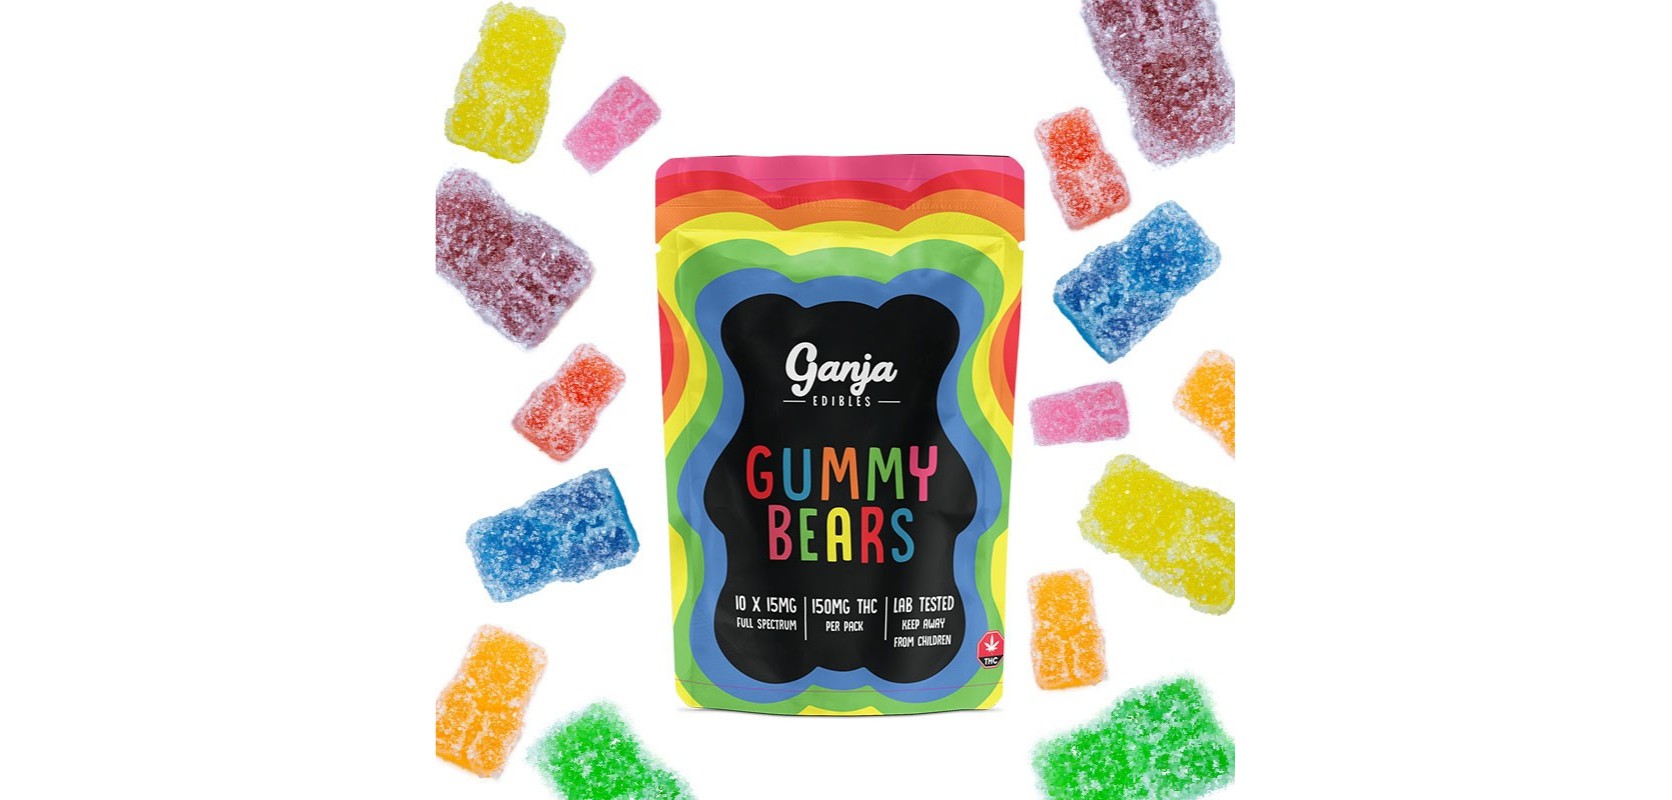 The Ganja Edibles – Sour Ganja Bears 150mg THC are a staple in every pothead's snack collection. 